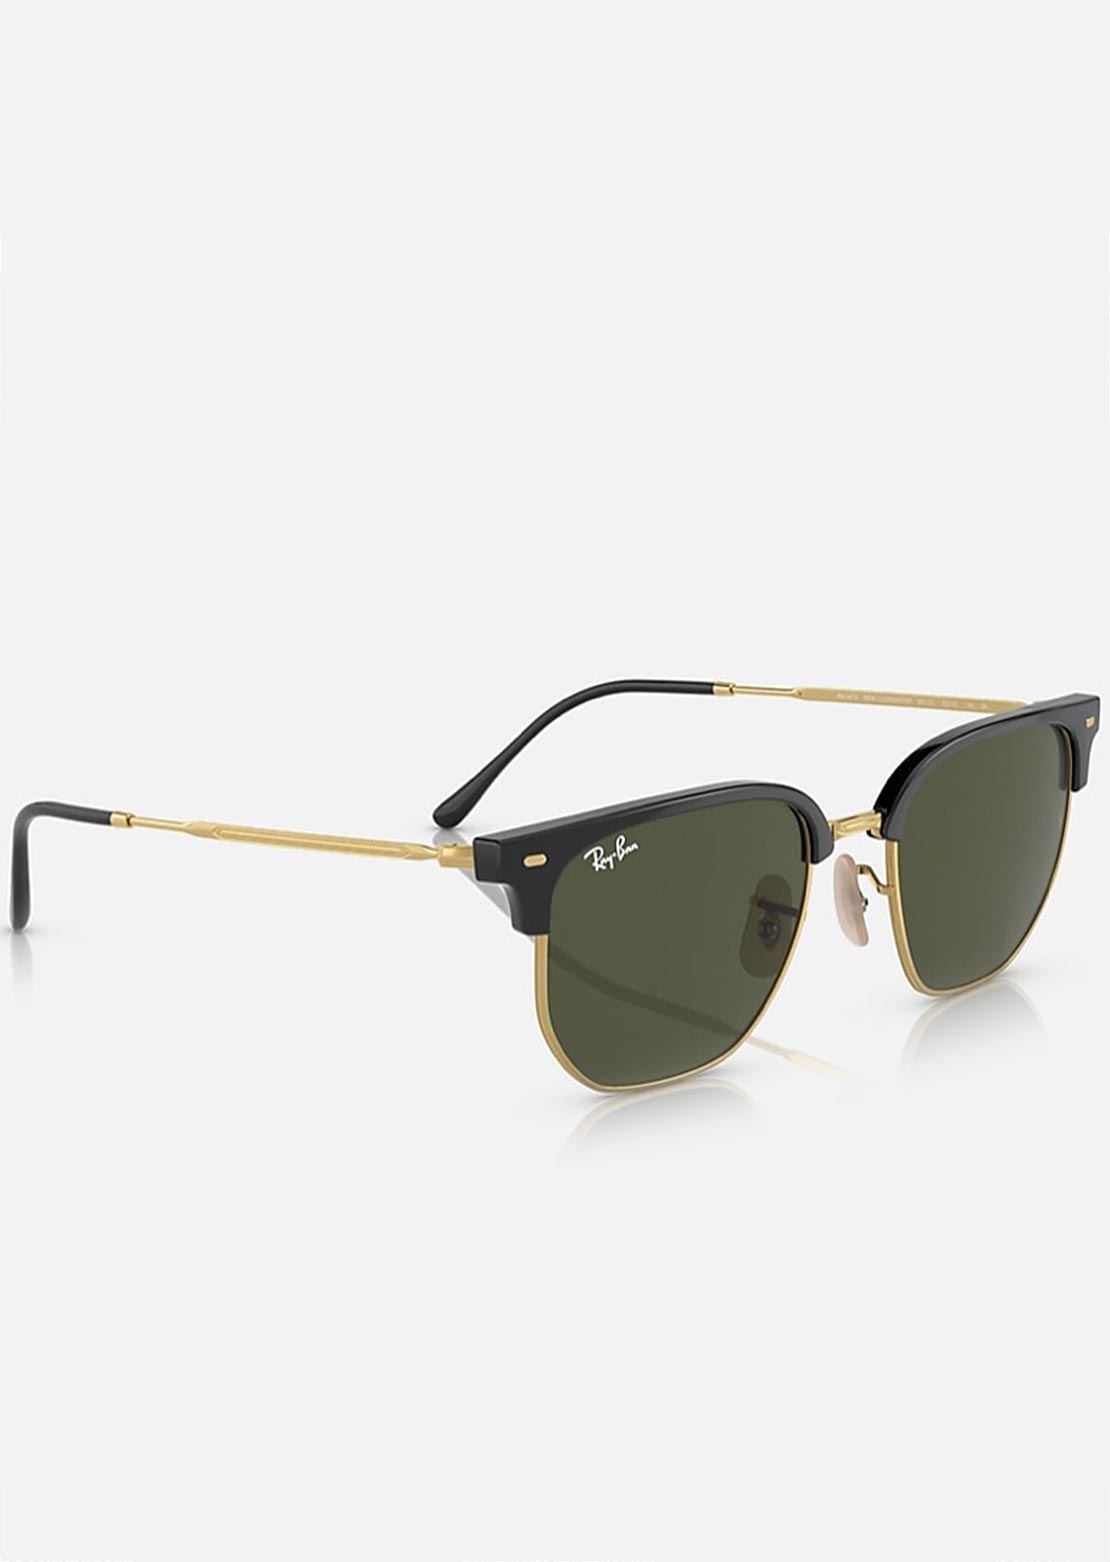 Ray-Ban New Clubmaster RB4416 Sunglasses Black on Arista